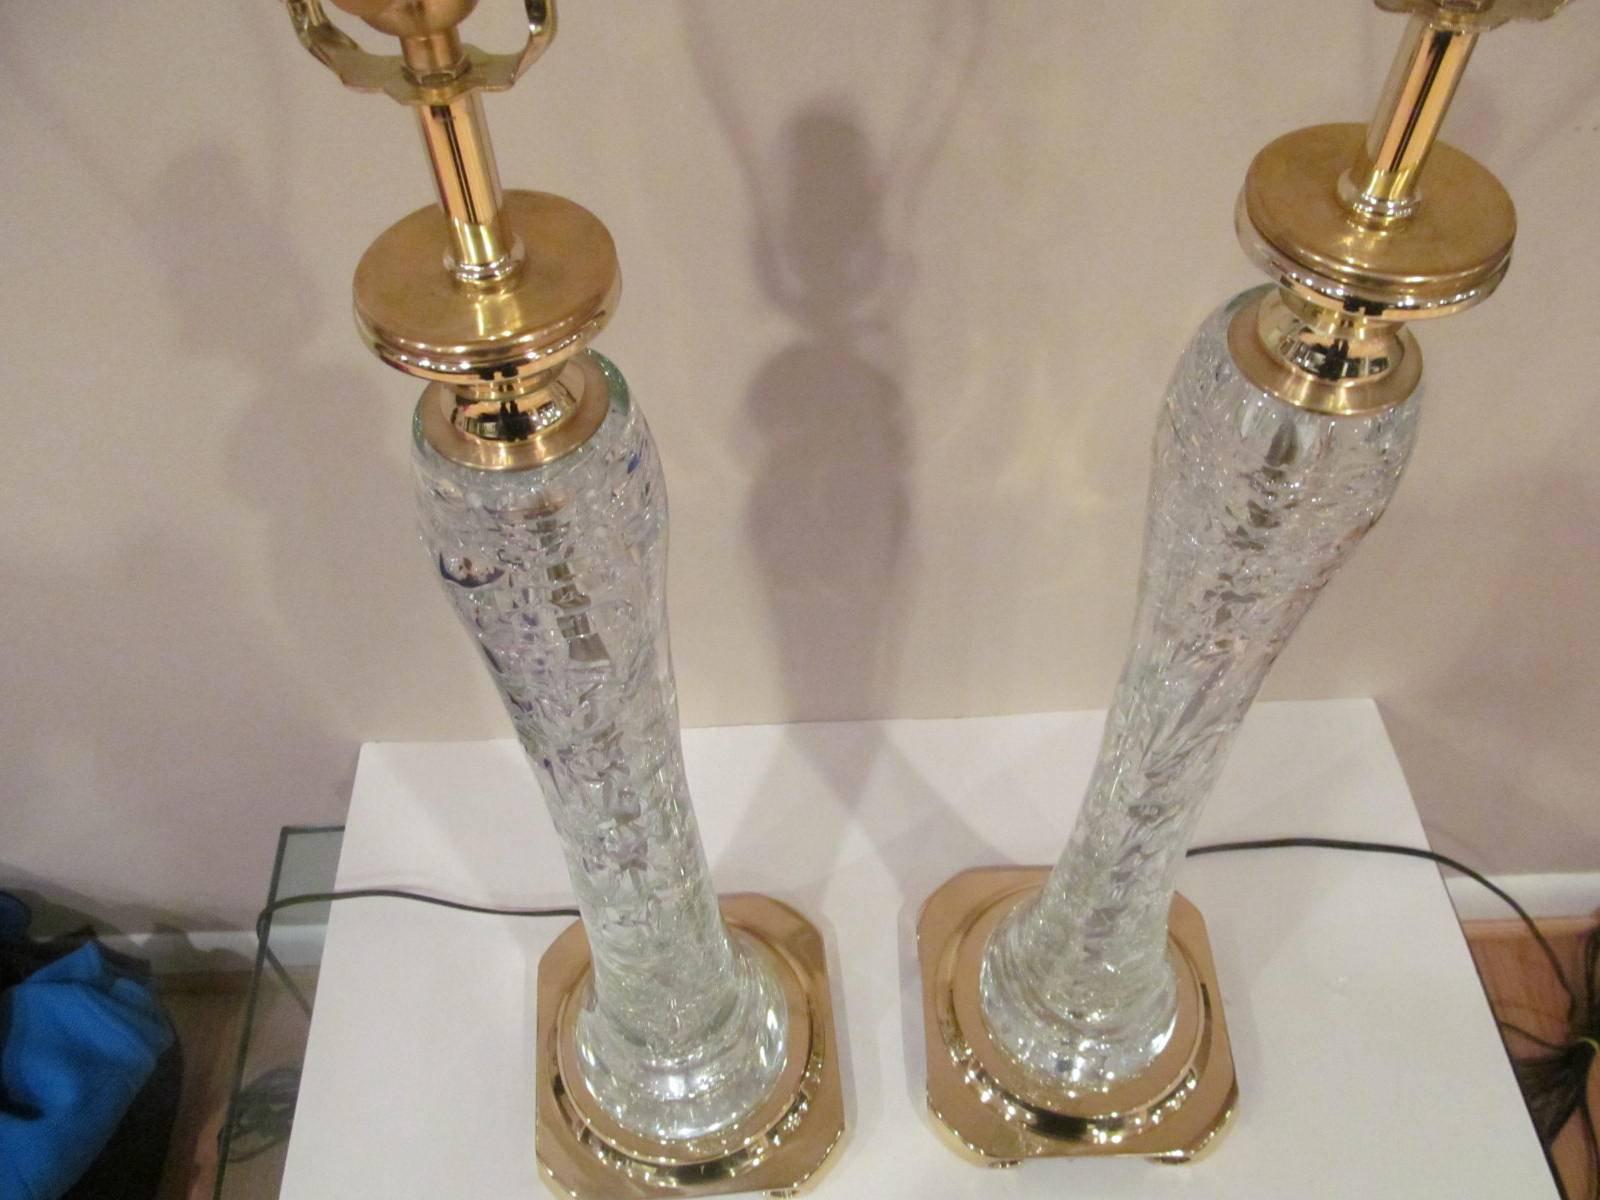 Amazing pair of rock crystal table lamps. Each has one very large stand alone piece. Rare and beautiful sculptural table lamps rewired and ready for use.